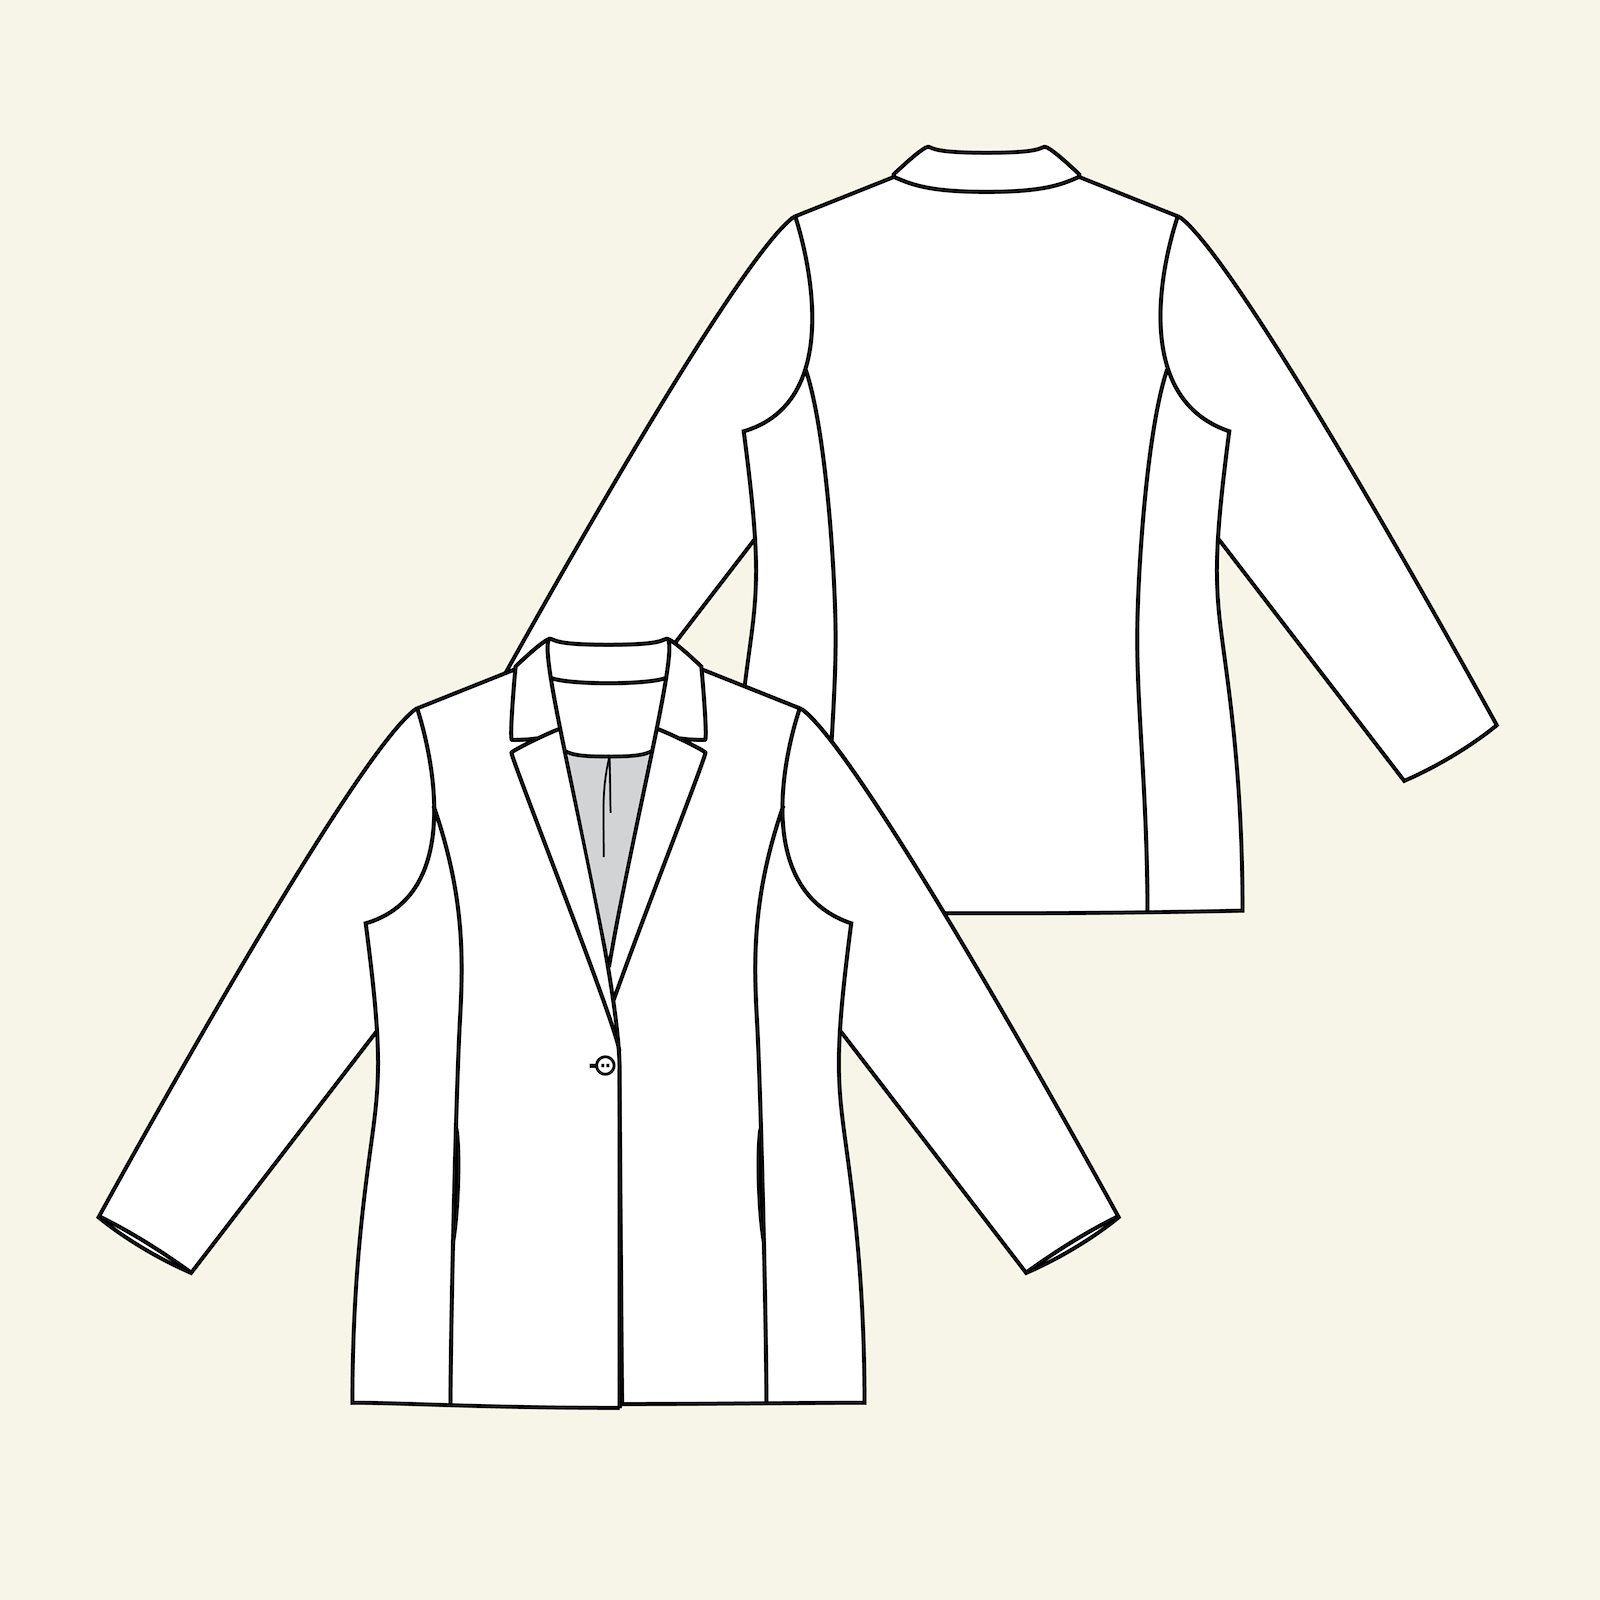 Suit jacket with lining, 46/18 p24048_pack